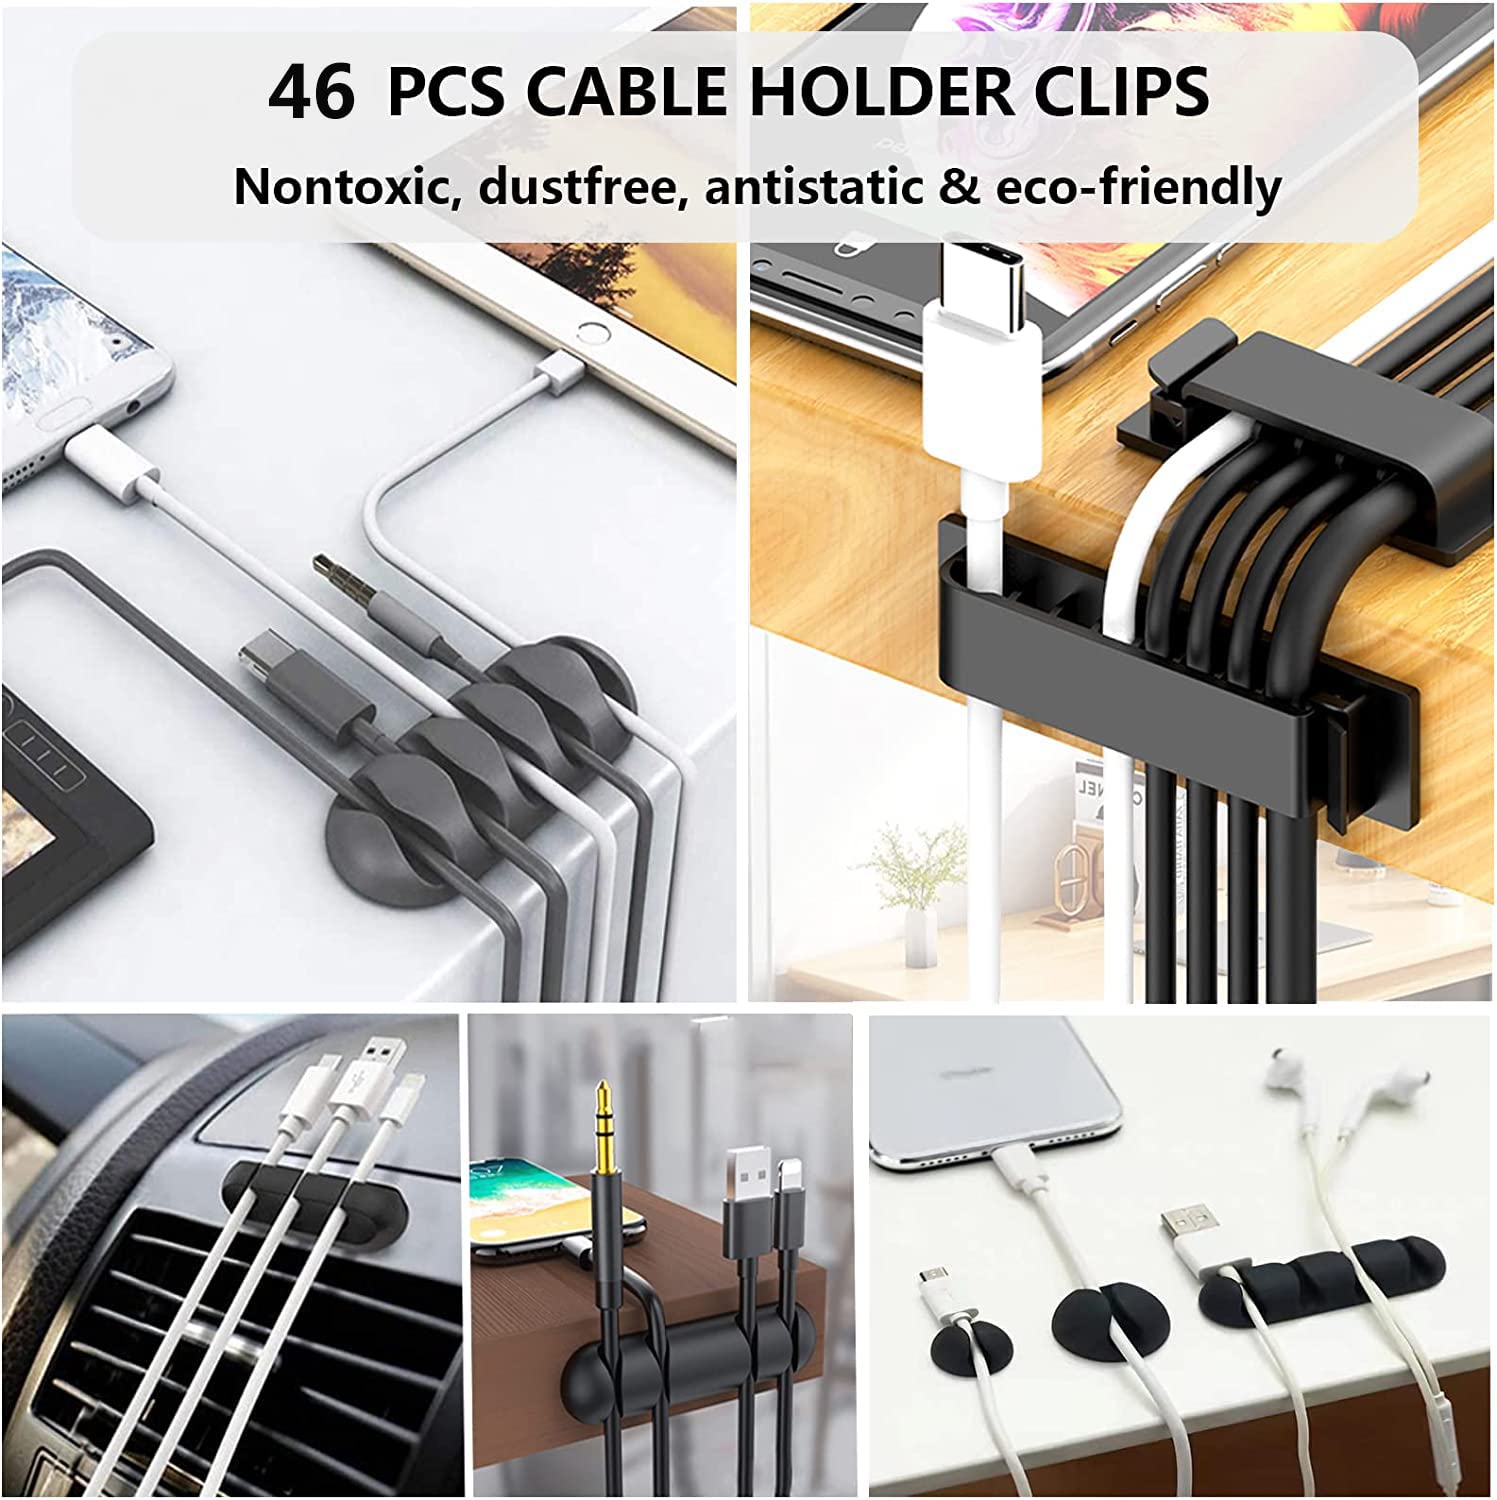 192 PCS Cable Management Kit 4 Wire Organizer Sleeve,11 Cable Holder,35Cord Clips 10+2 Roll Cable Organizer Straps and 100 Fastening Cable Ties for Computer TV Under Desk